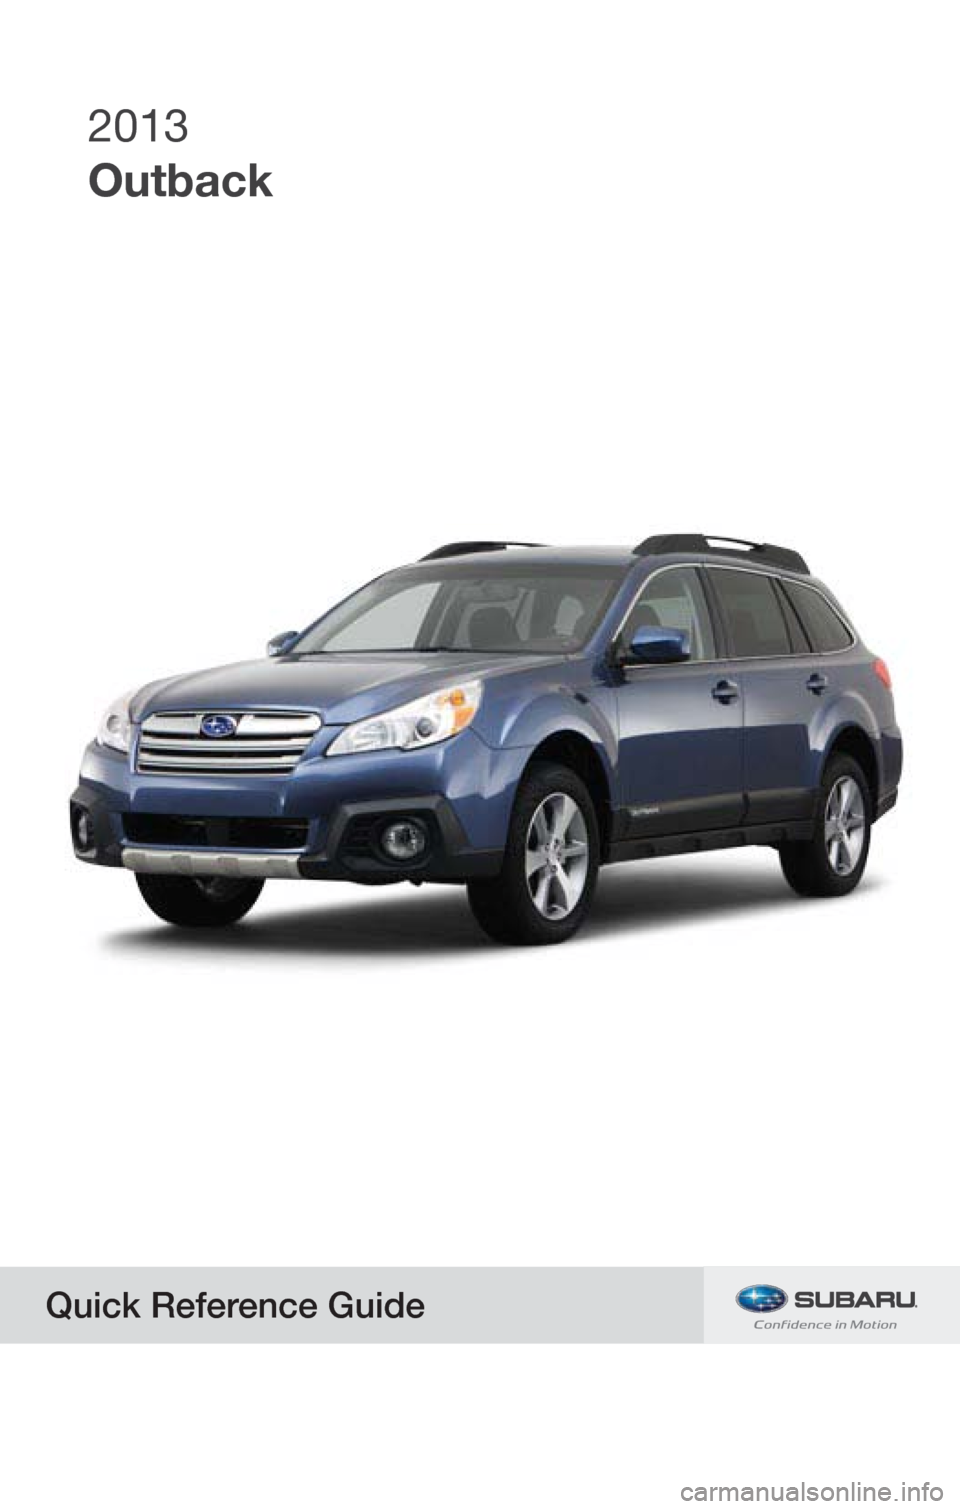 SUBARU OUTBACK 2013 5.G Quick Reference Guide 2013
Outback
Quick Reference Guide  